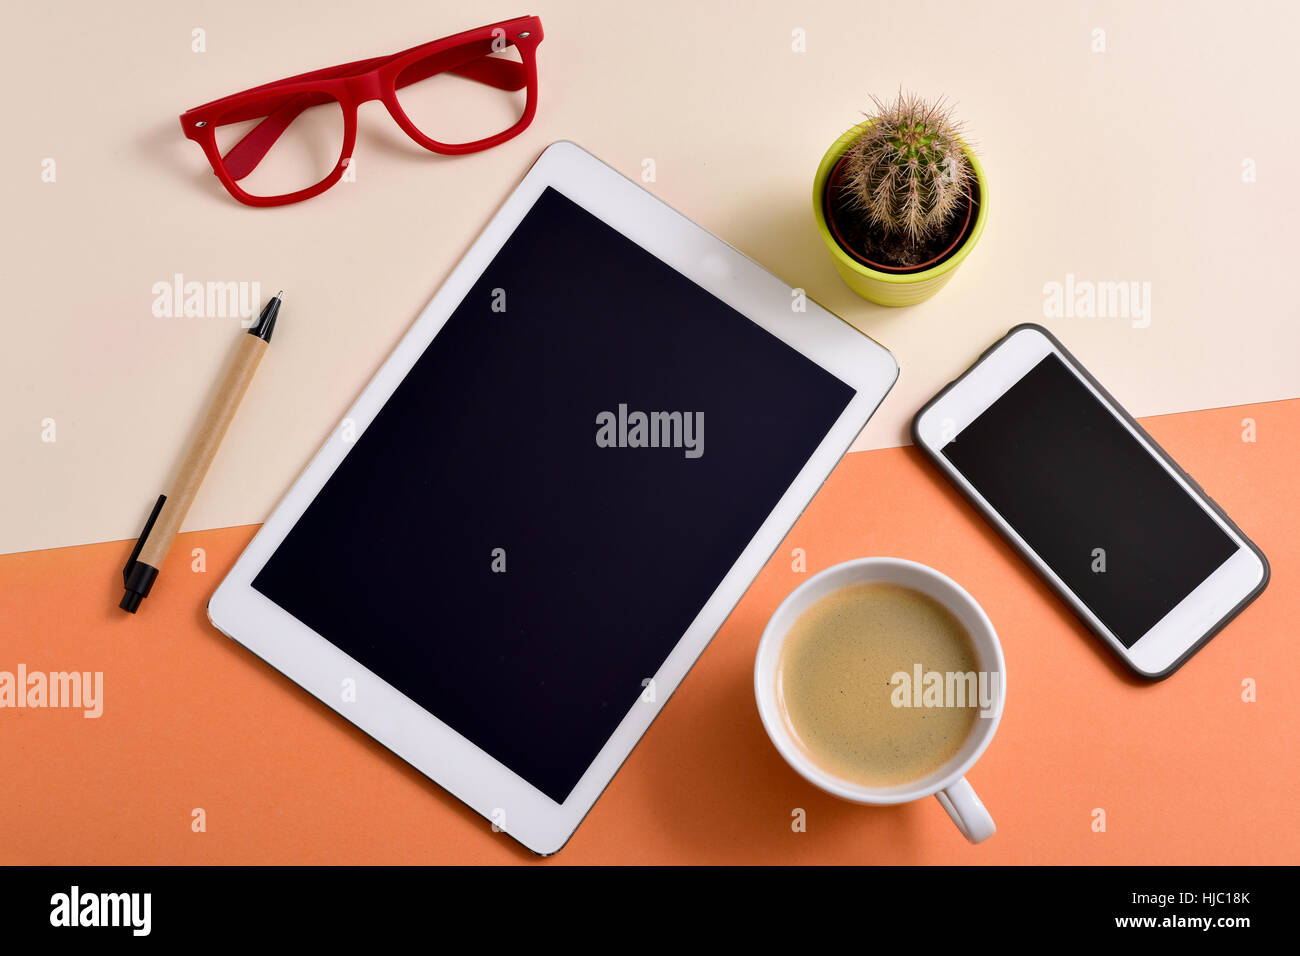 high-angle shot of an office desk full of things, such as a pair of red eyeglasses, a cup with white coffee, a tablet, a smartphone, a pen and a cactu Stock Photo